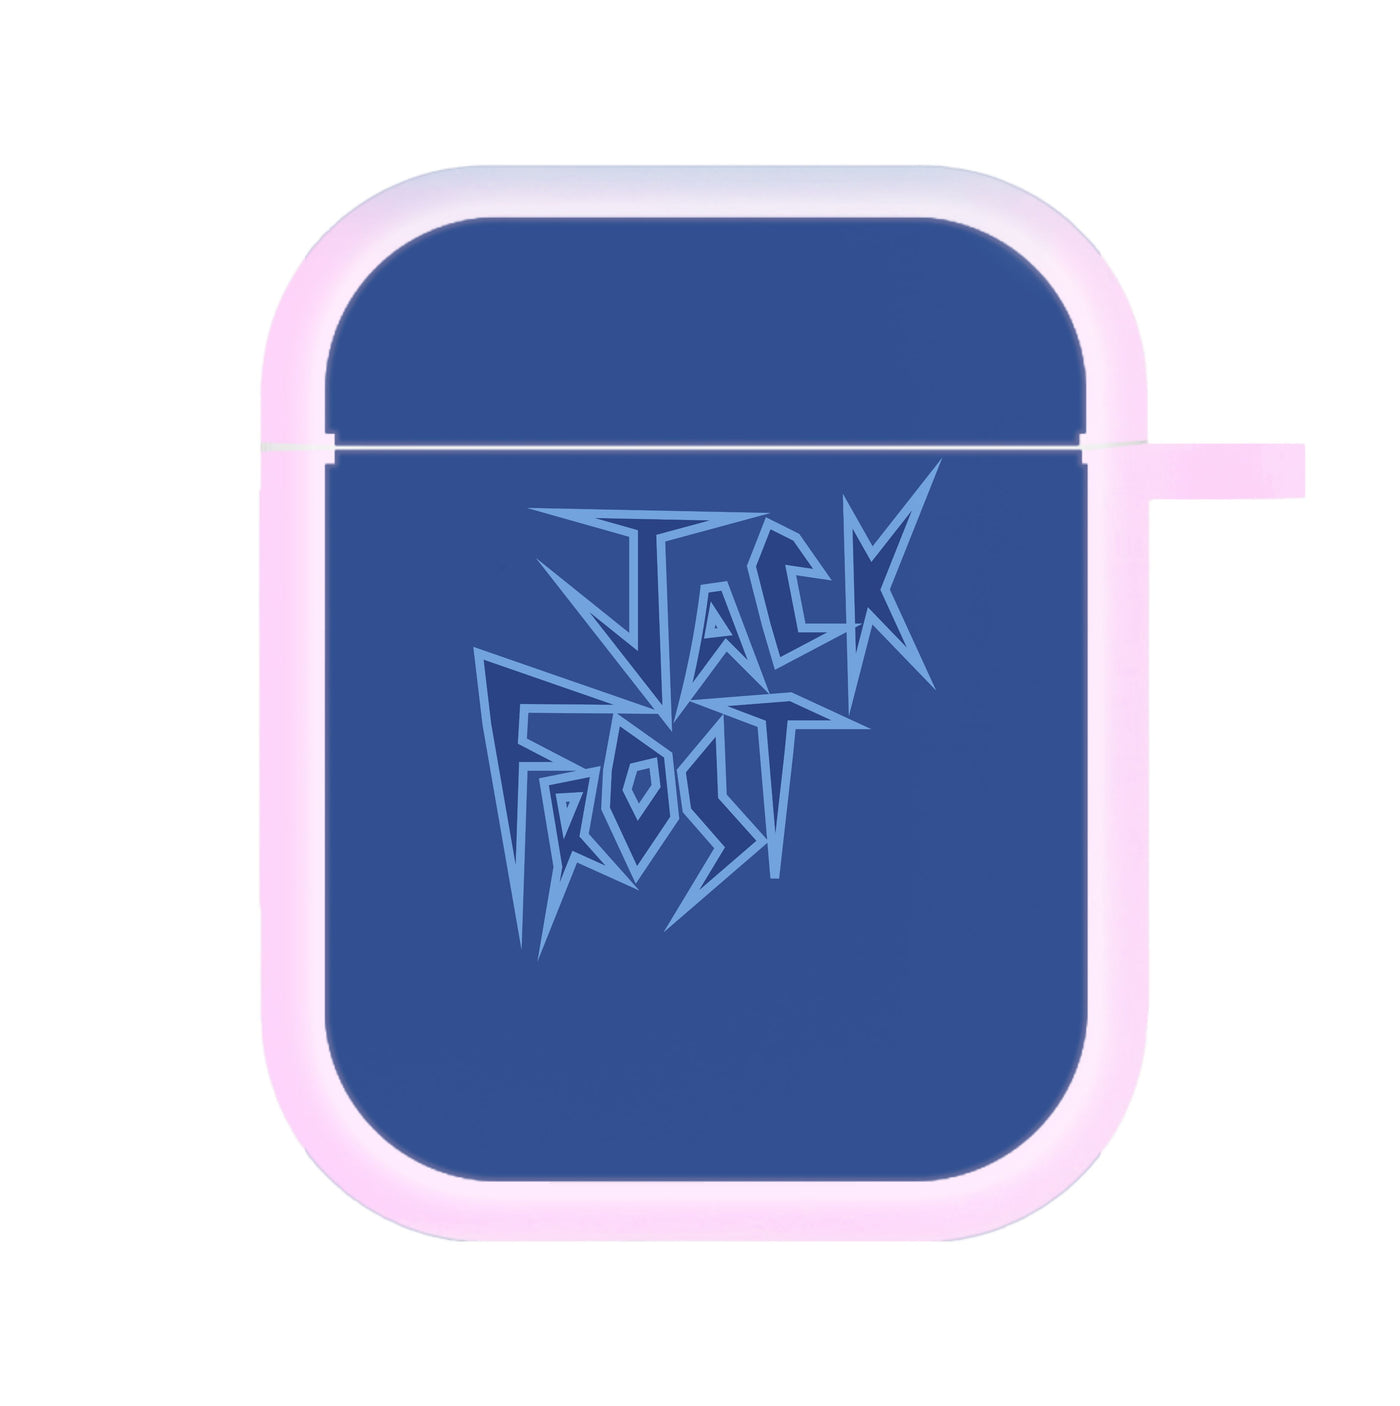 Title - Jack Frost AirPods Case